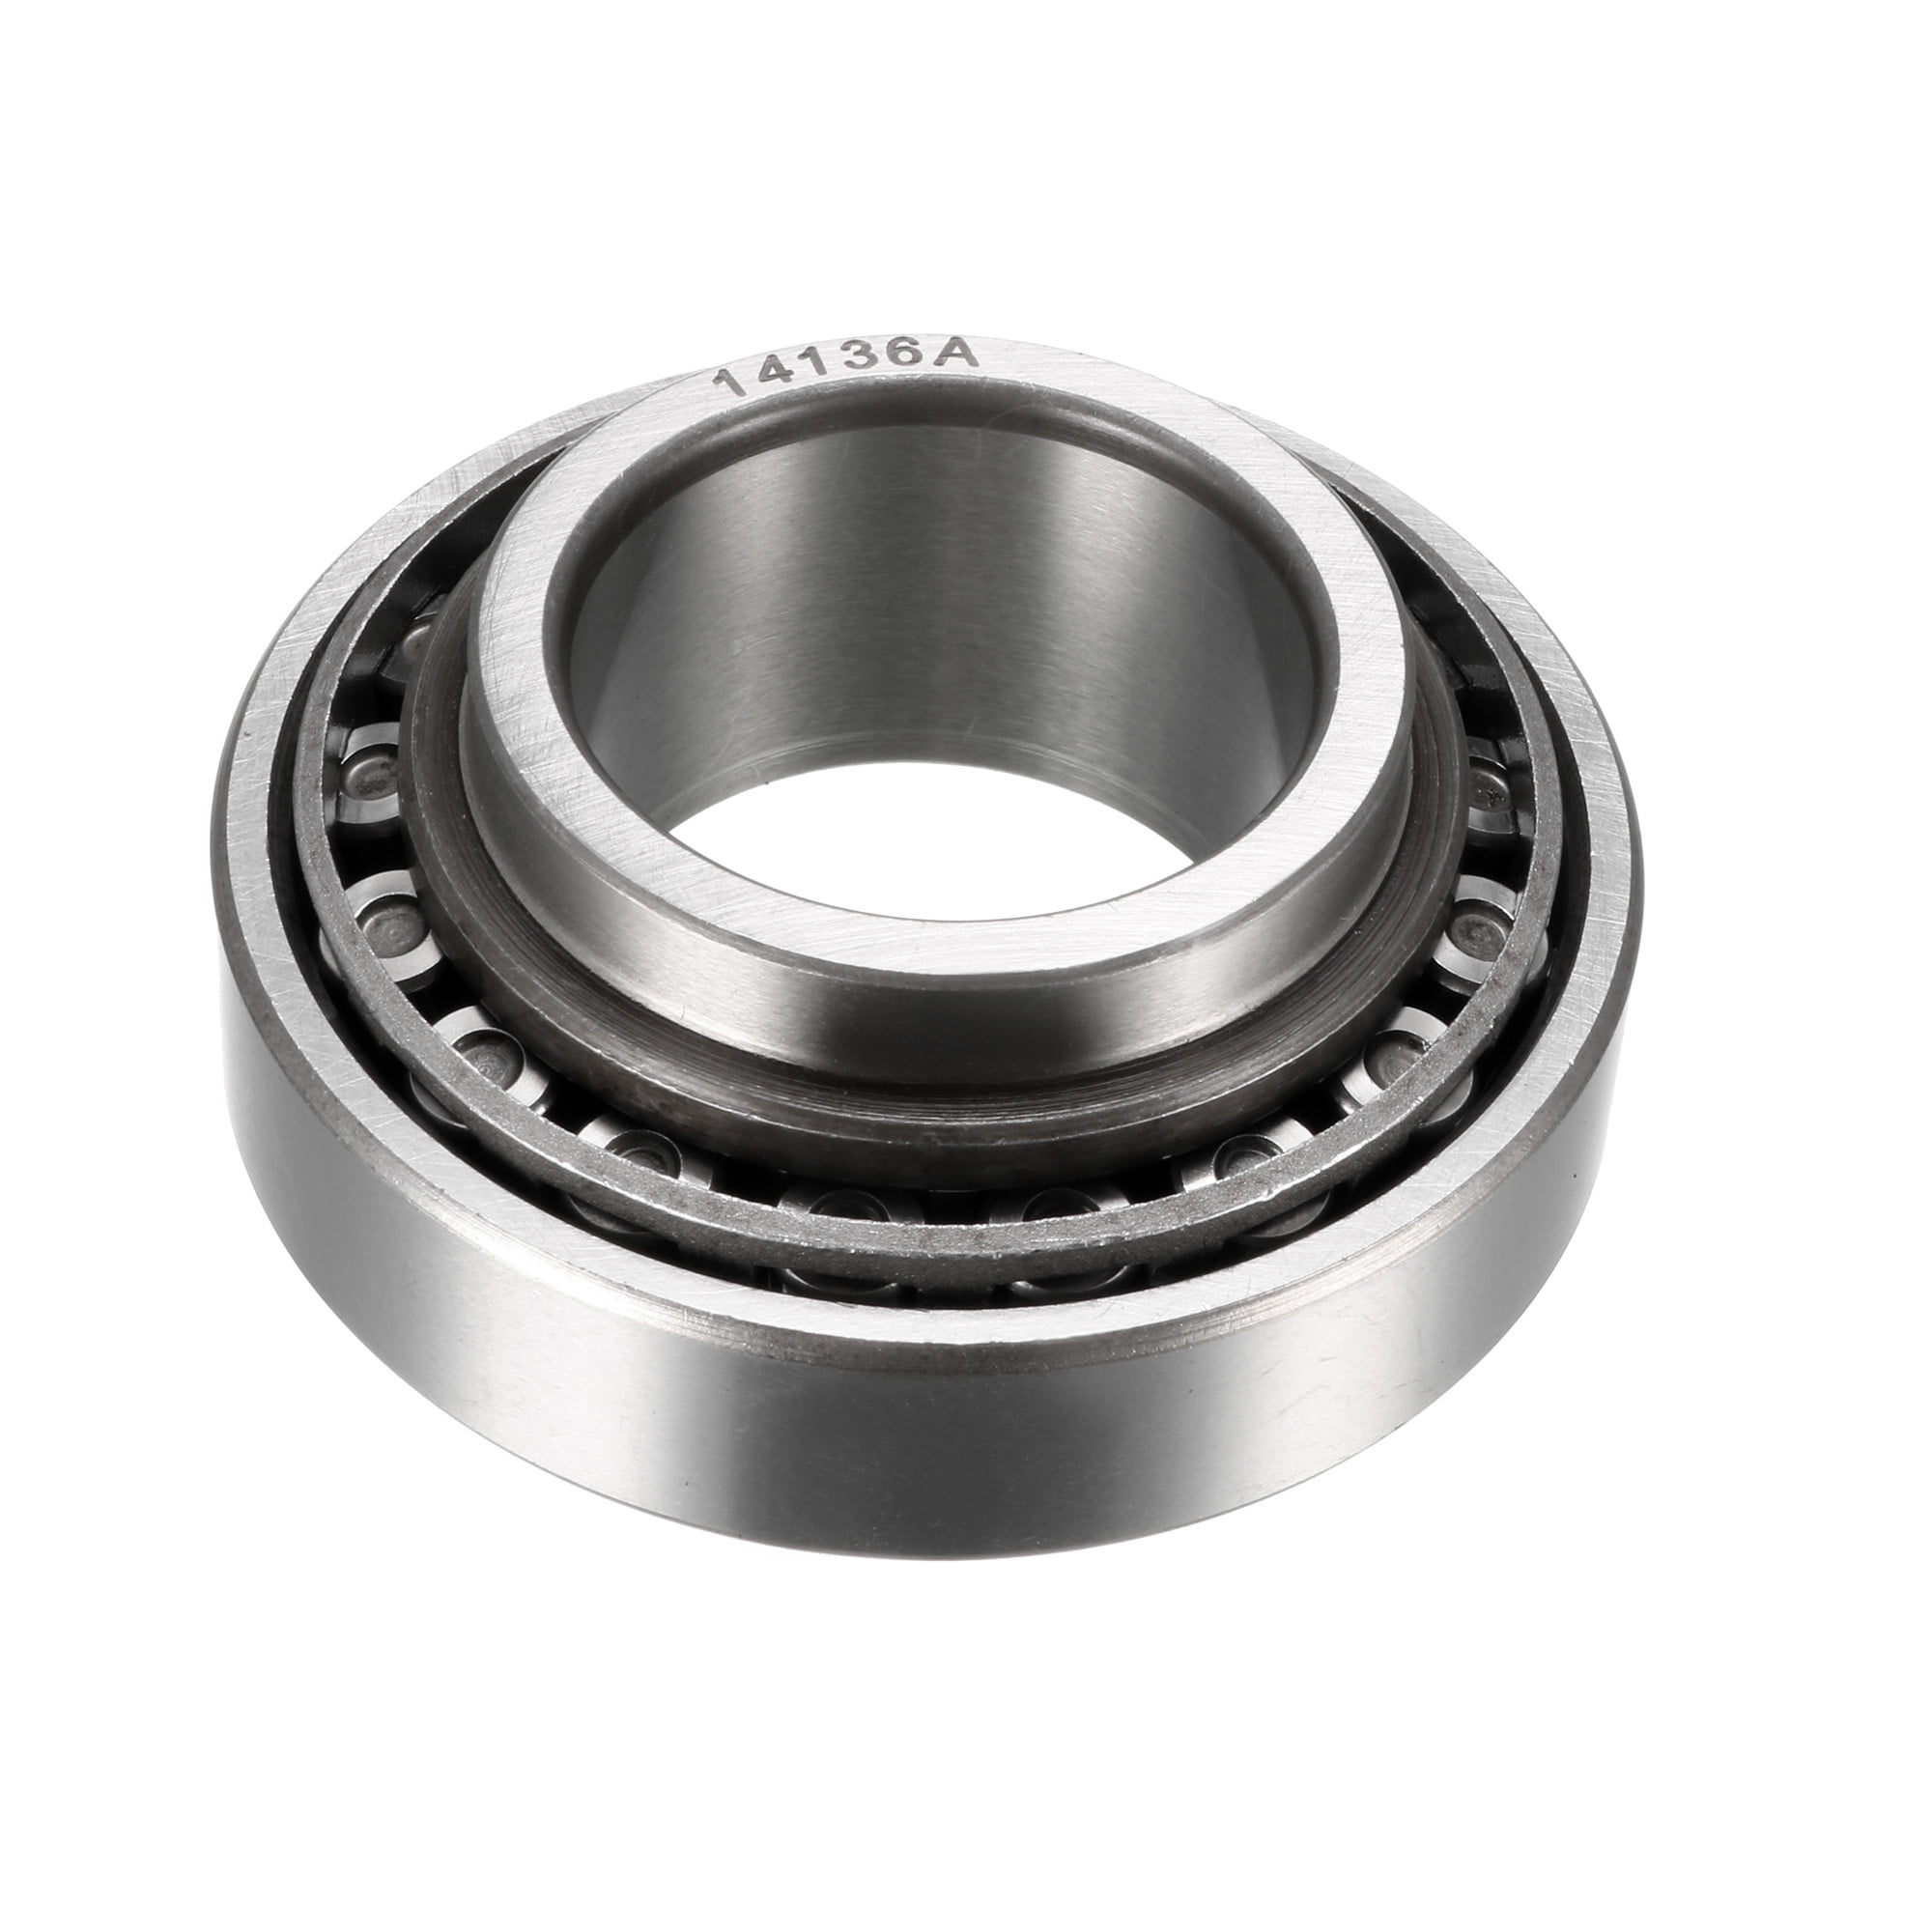 2 Count Timken Tapered Roller Bearing Cups 14276 for sale online 